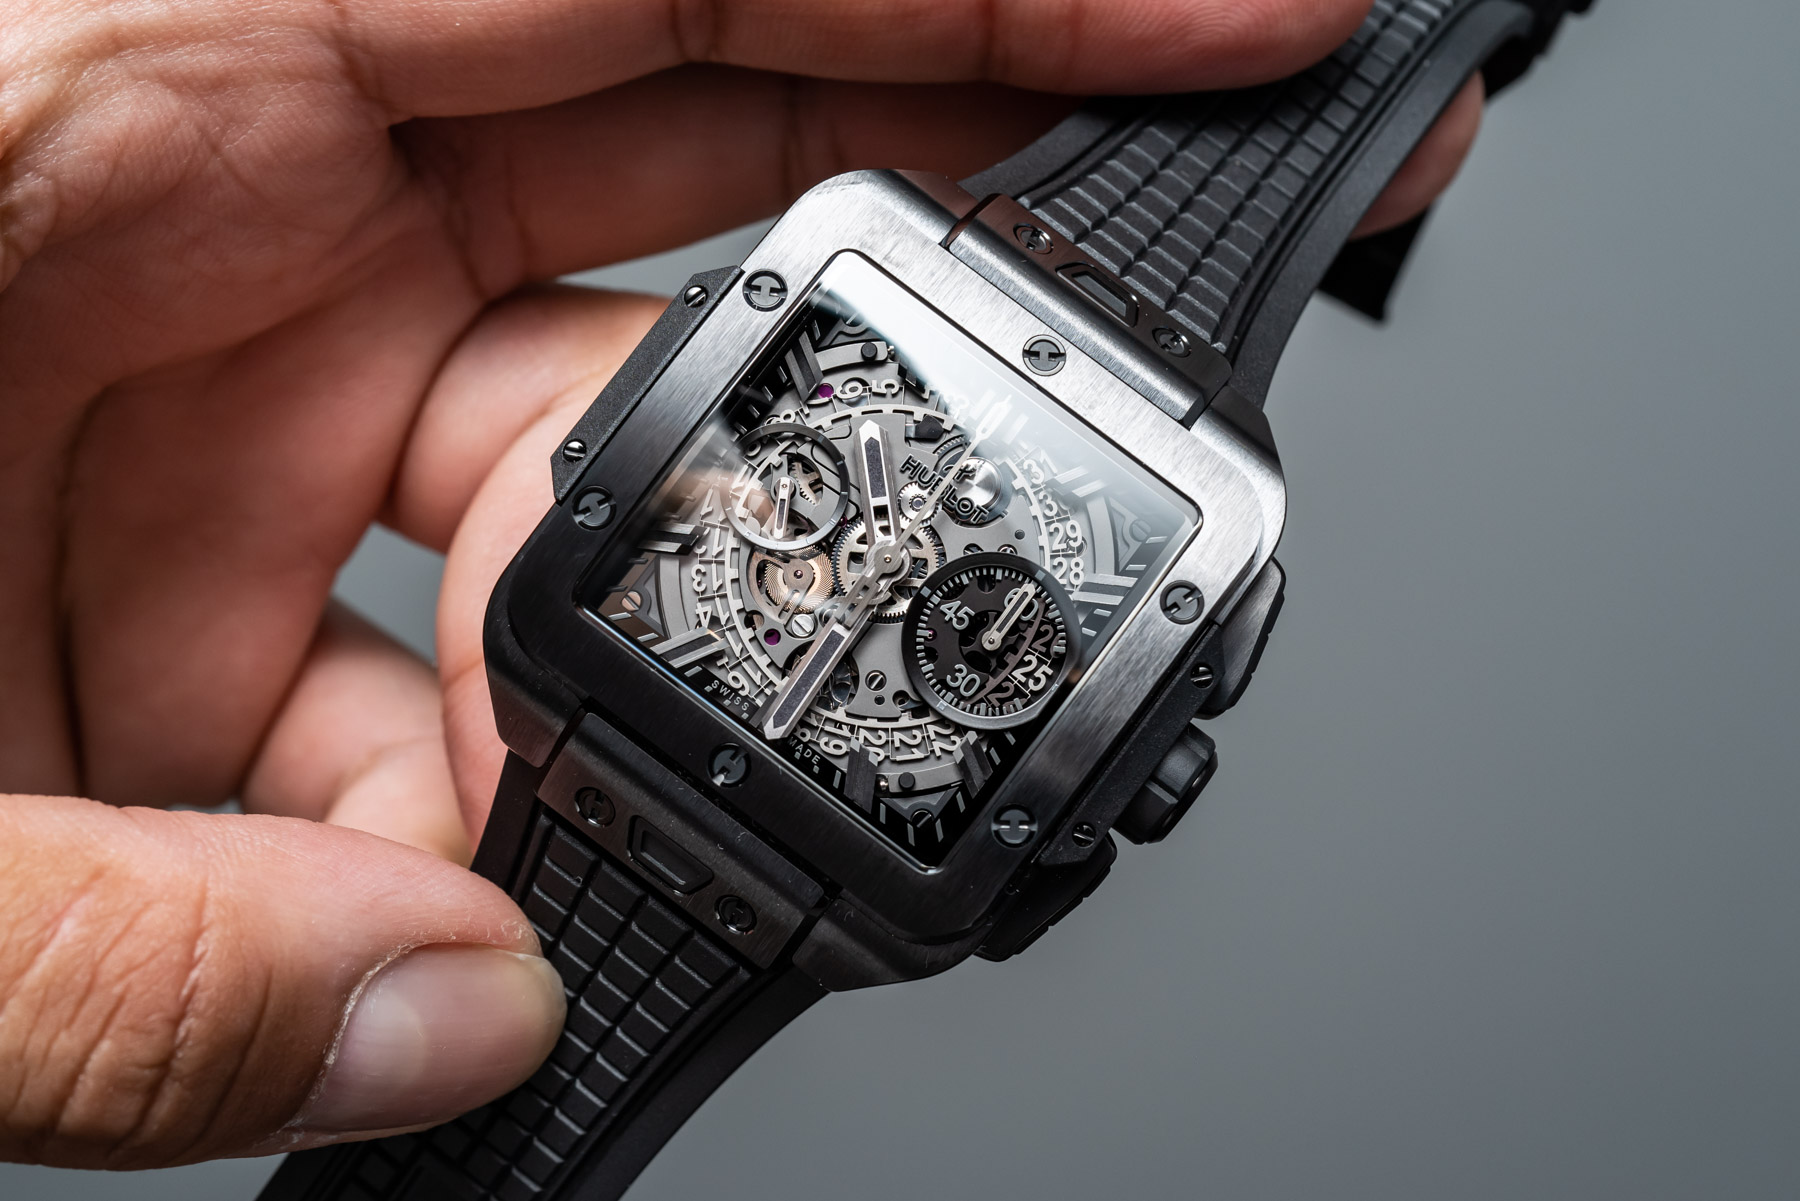 Hublot: Hublot's Square Bang Unico: A New Watch-shape Takes Form At Watches  & Wonders - Luxferity